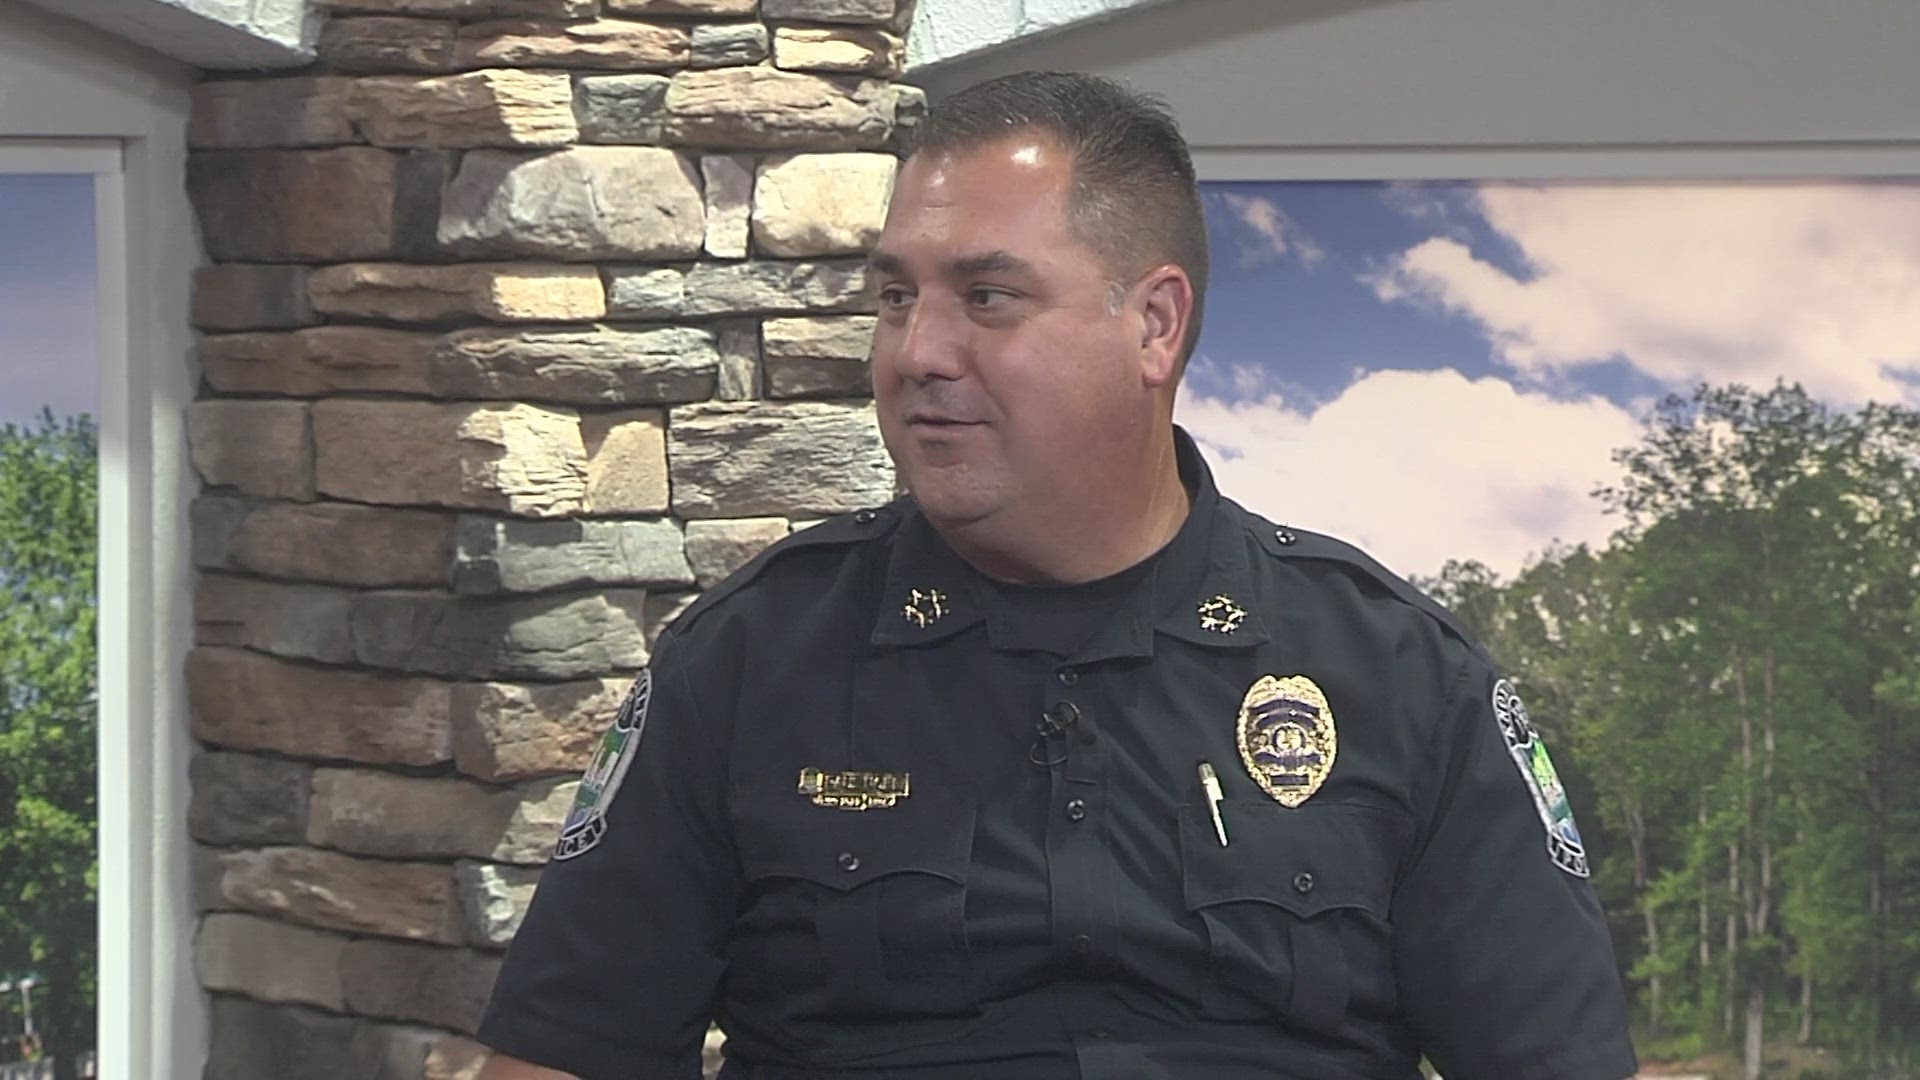 We sit down with KPD Chief Noel about how to stay safe on game day.